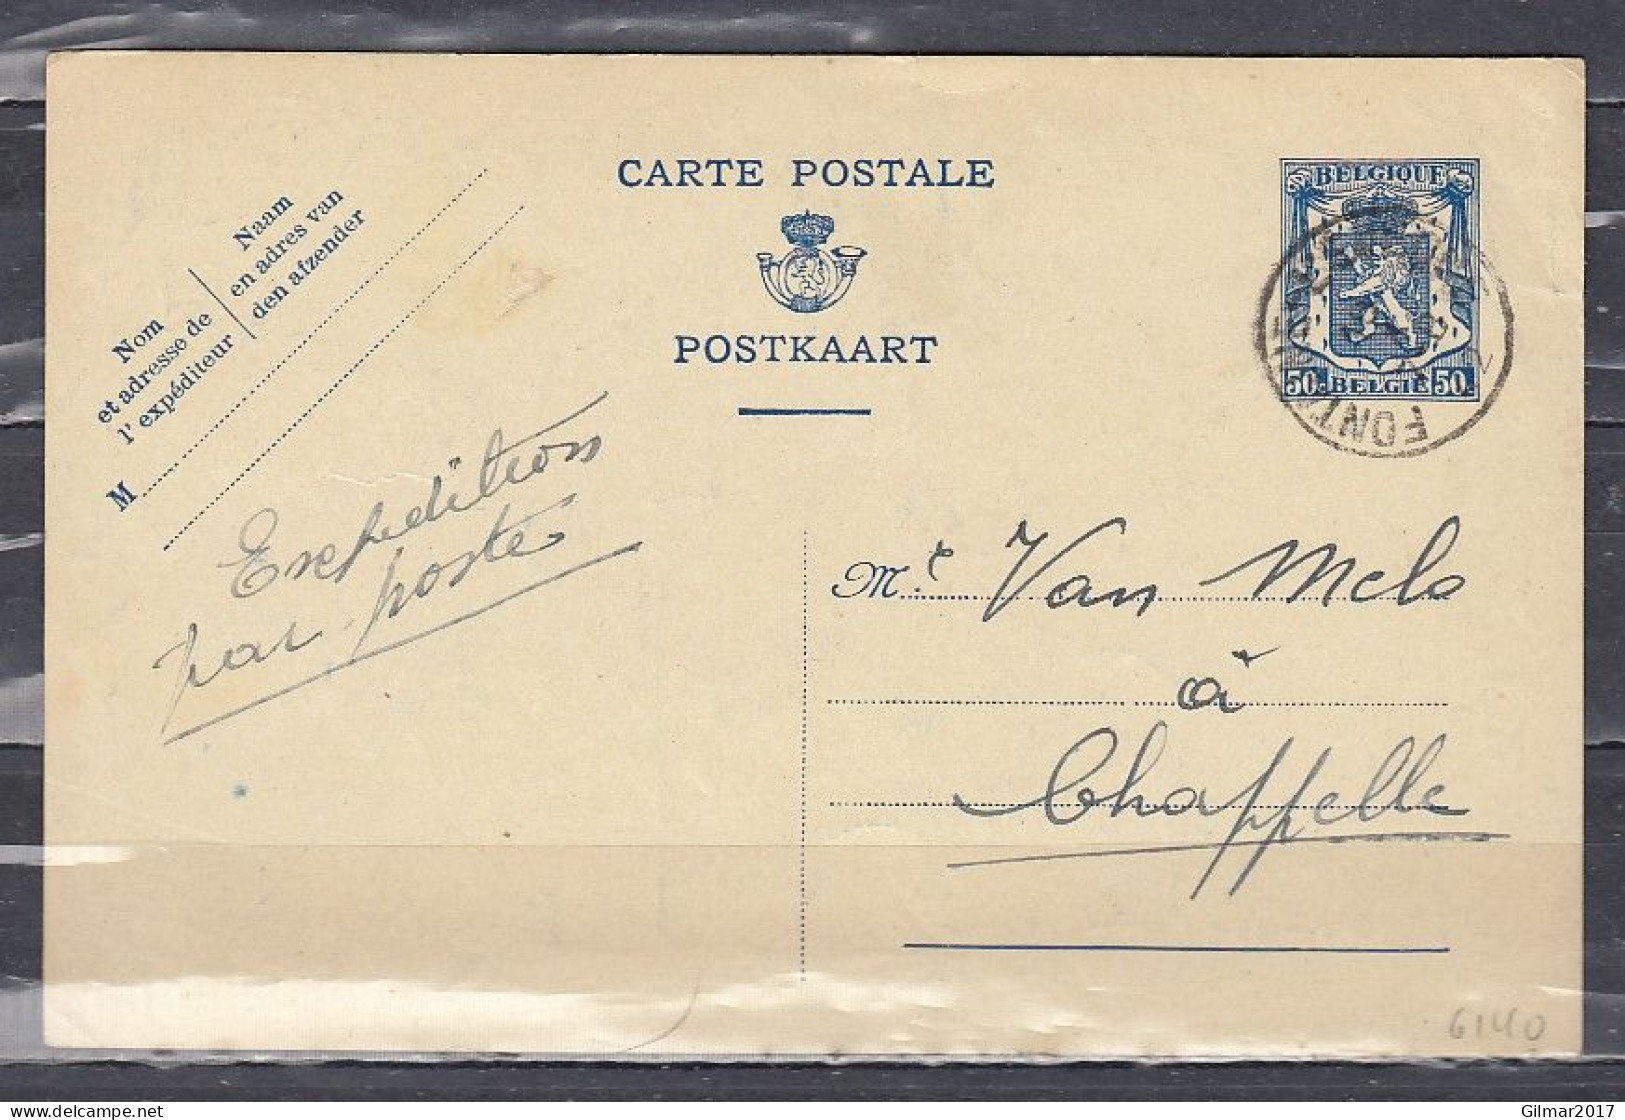 Postkaart Van Fontaine L'Eveque Naar Chappelle - 1935-1949 Small Seal Of The State